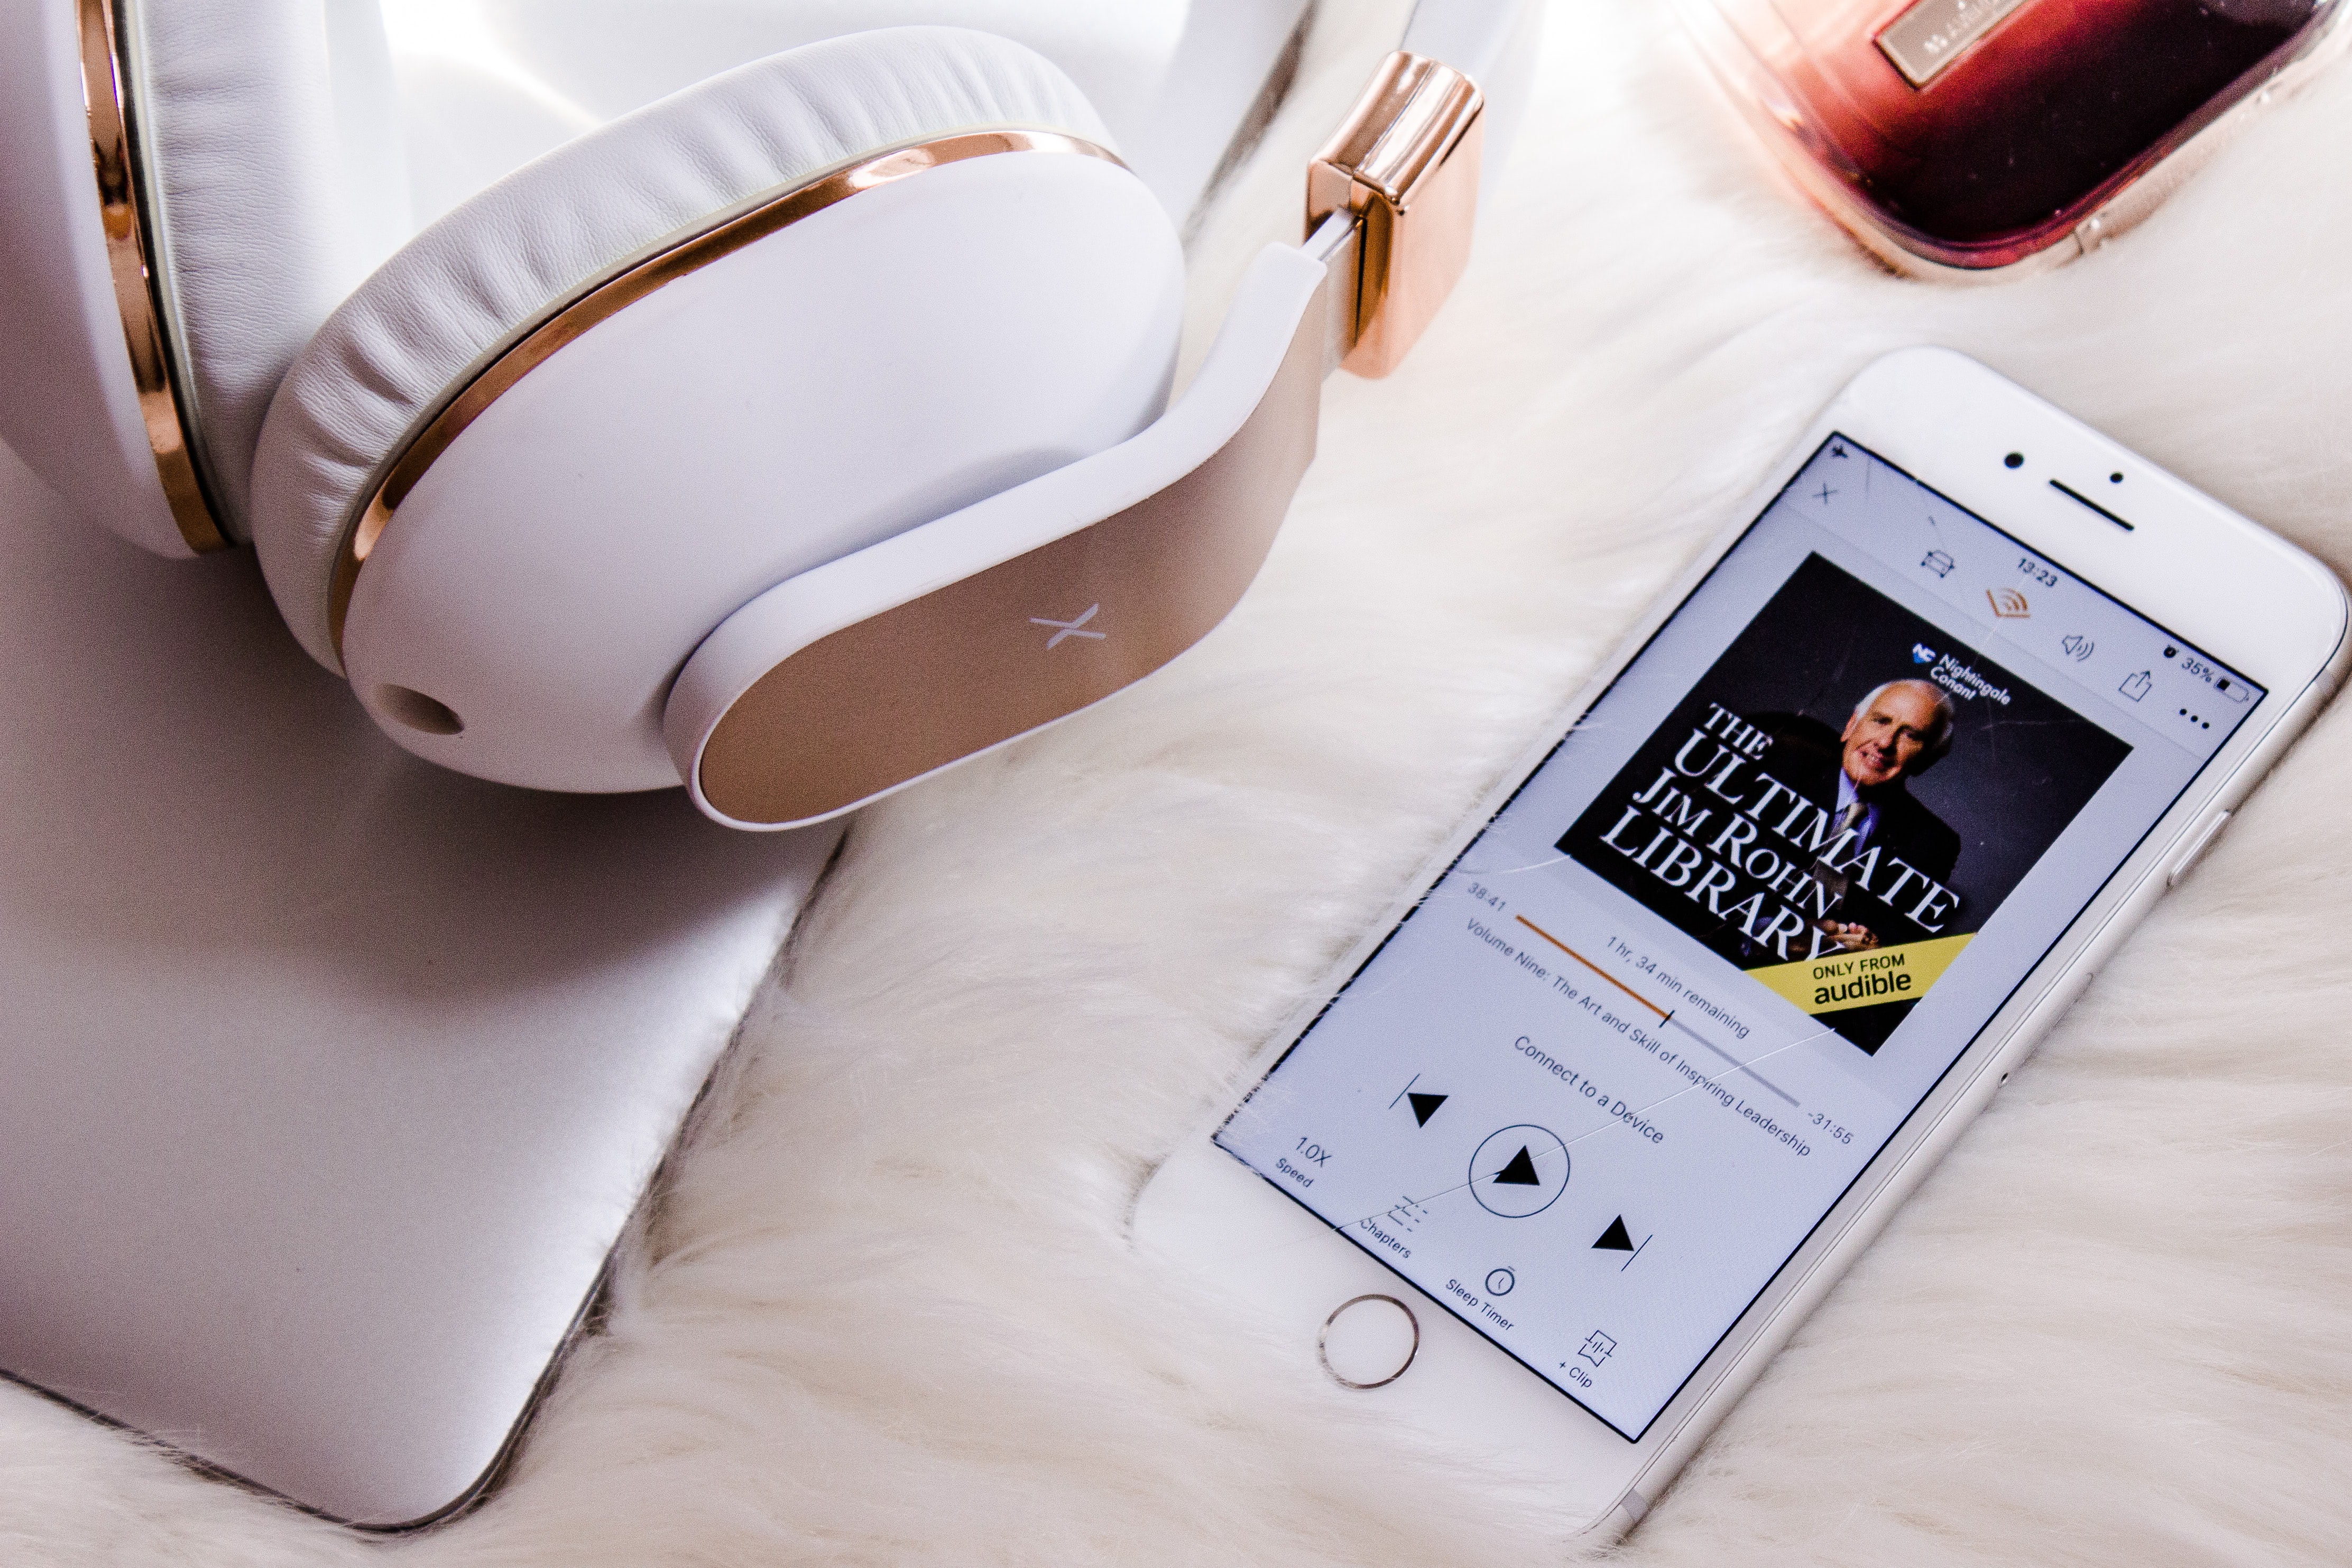 How to transfer audiobooks from PC to iPhone